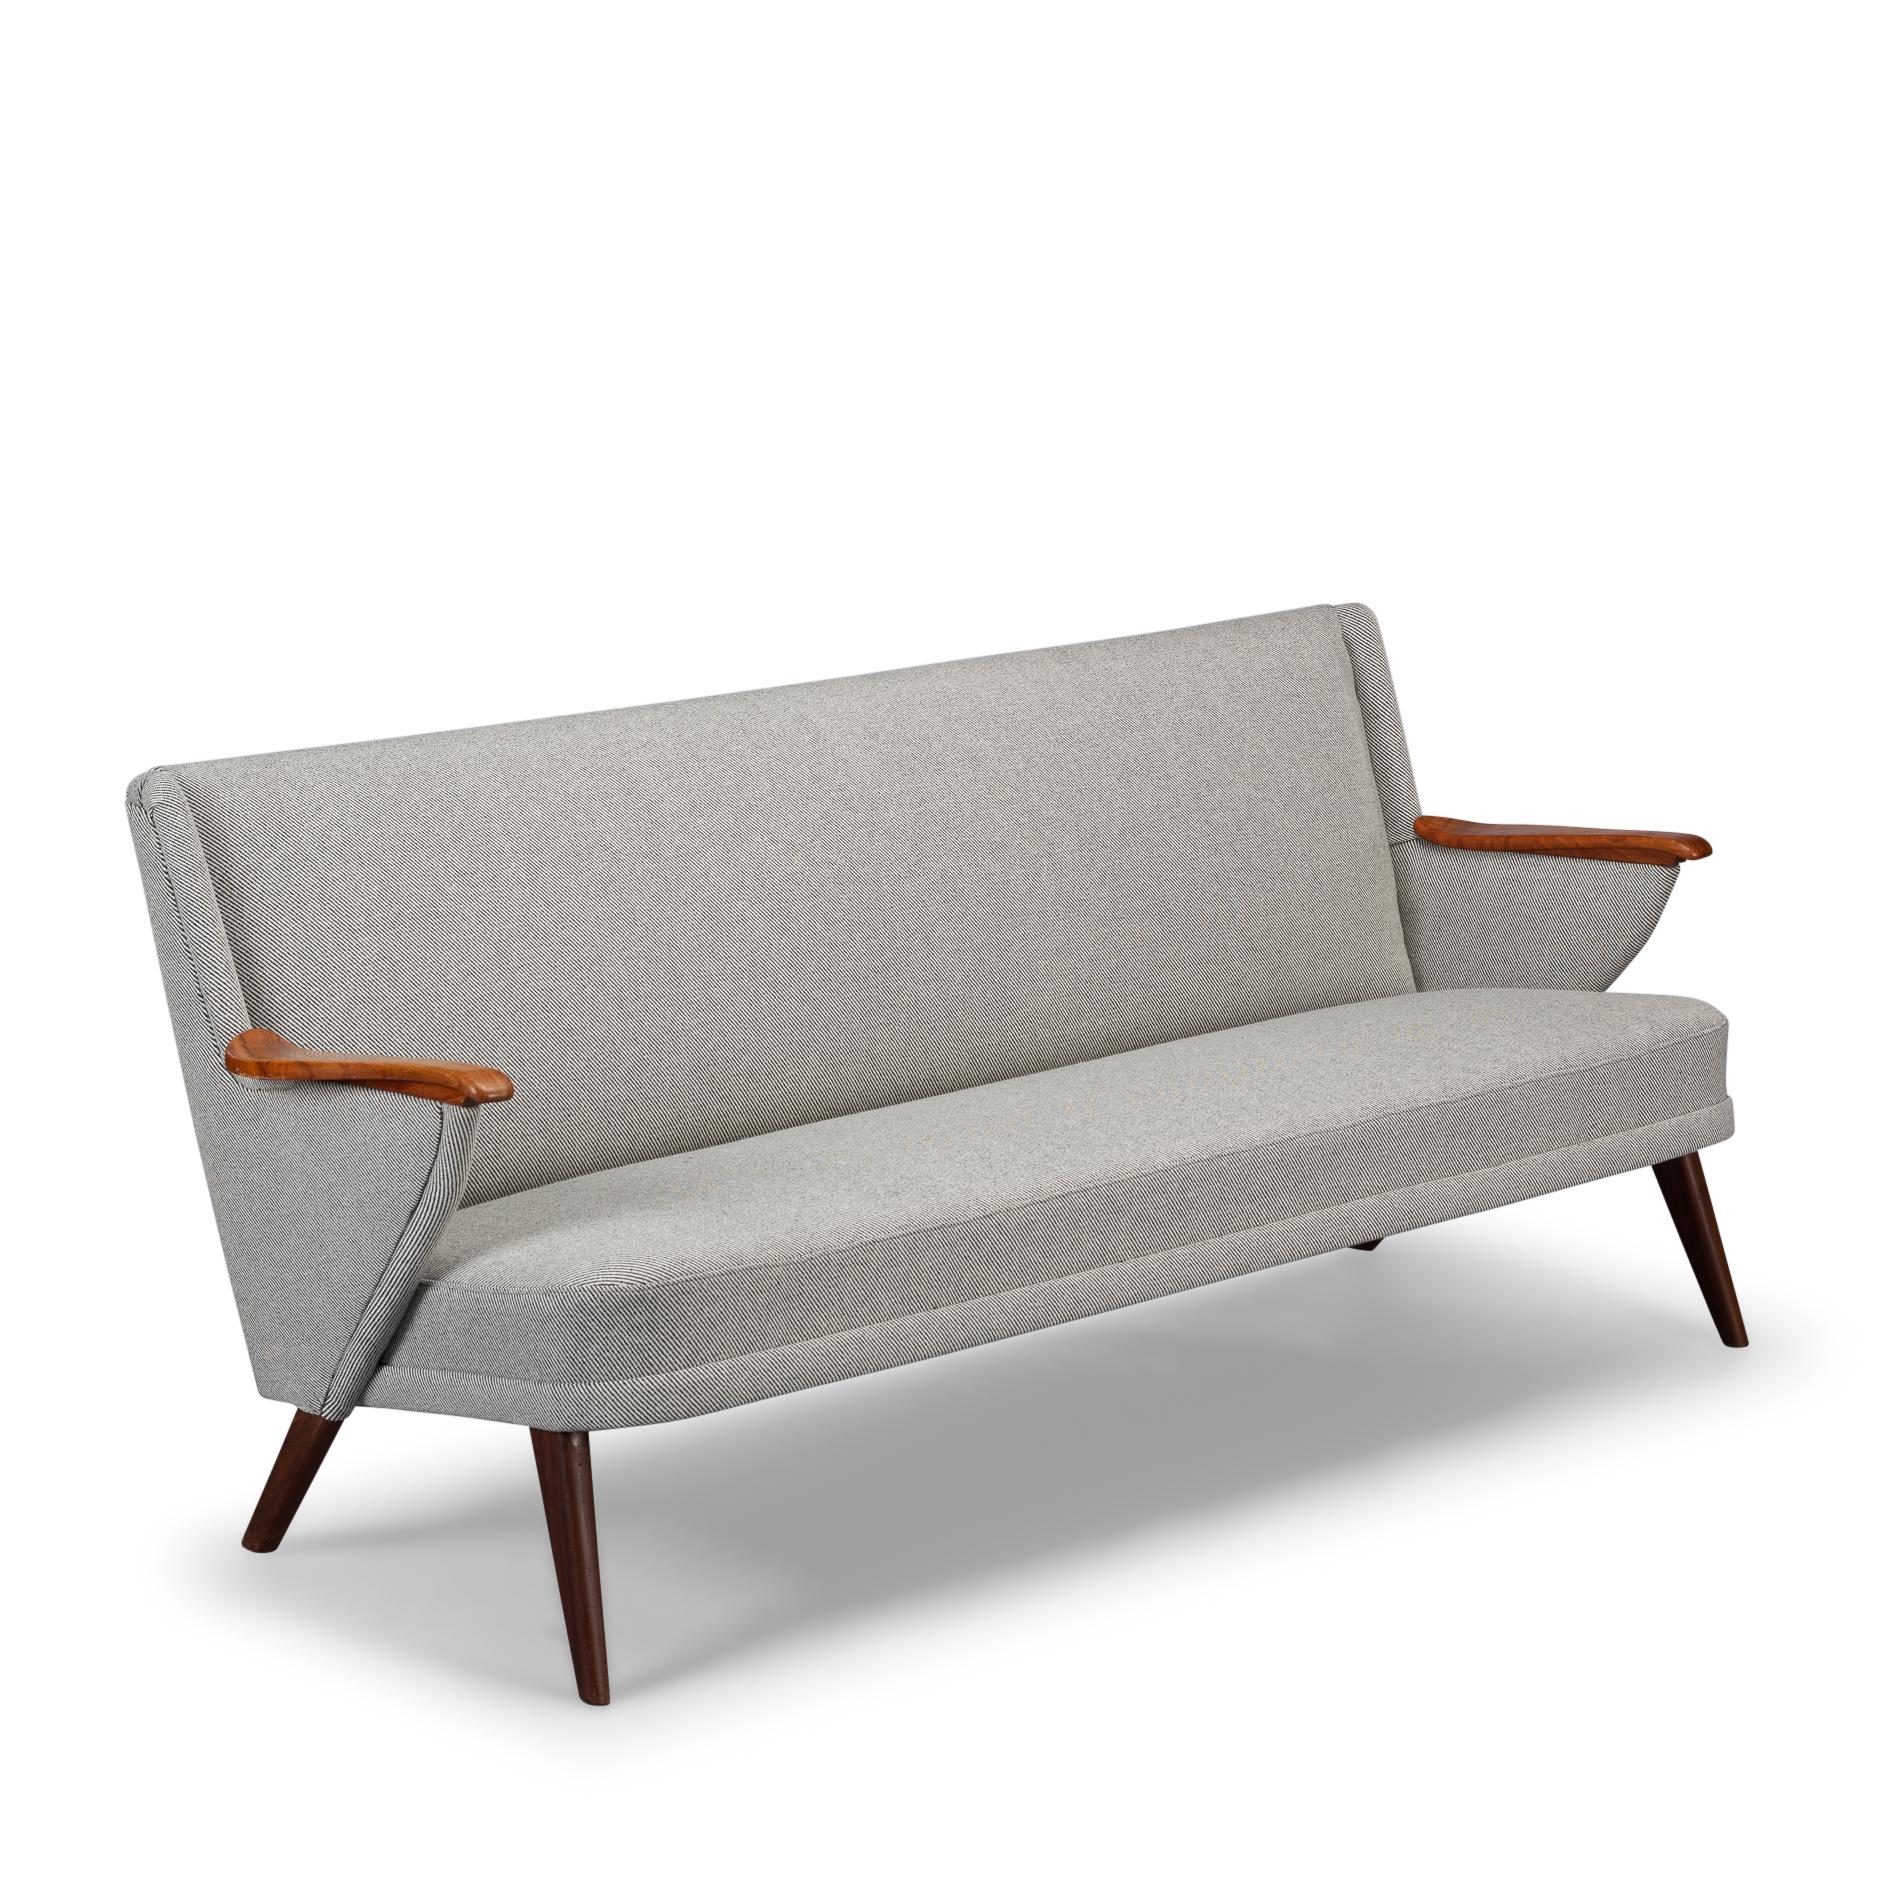 Edgy Johannes Andersen sofa for CFC Silkeborg in stunning new upholstery. This sofa is reupholstered with De Ploeg, Bergen12/08 in full accordance with the original upholstery as designed by Andersen. This sofa has a spacious yet straight seat